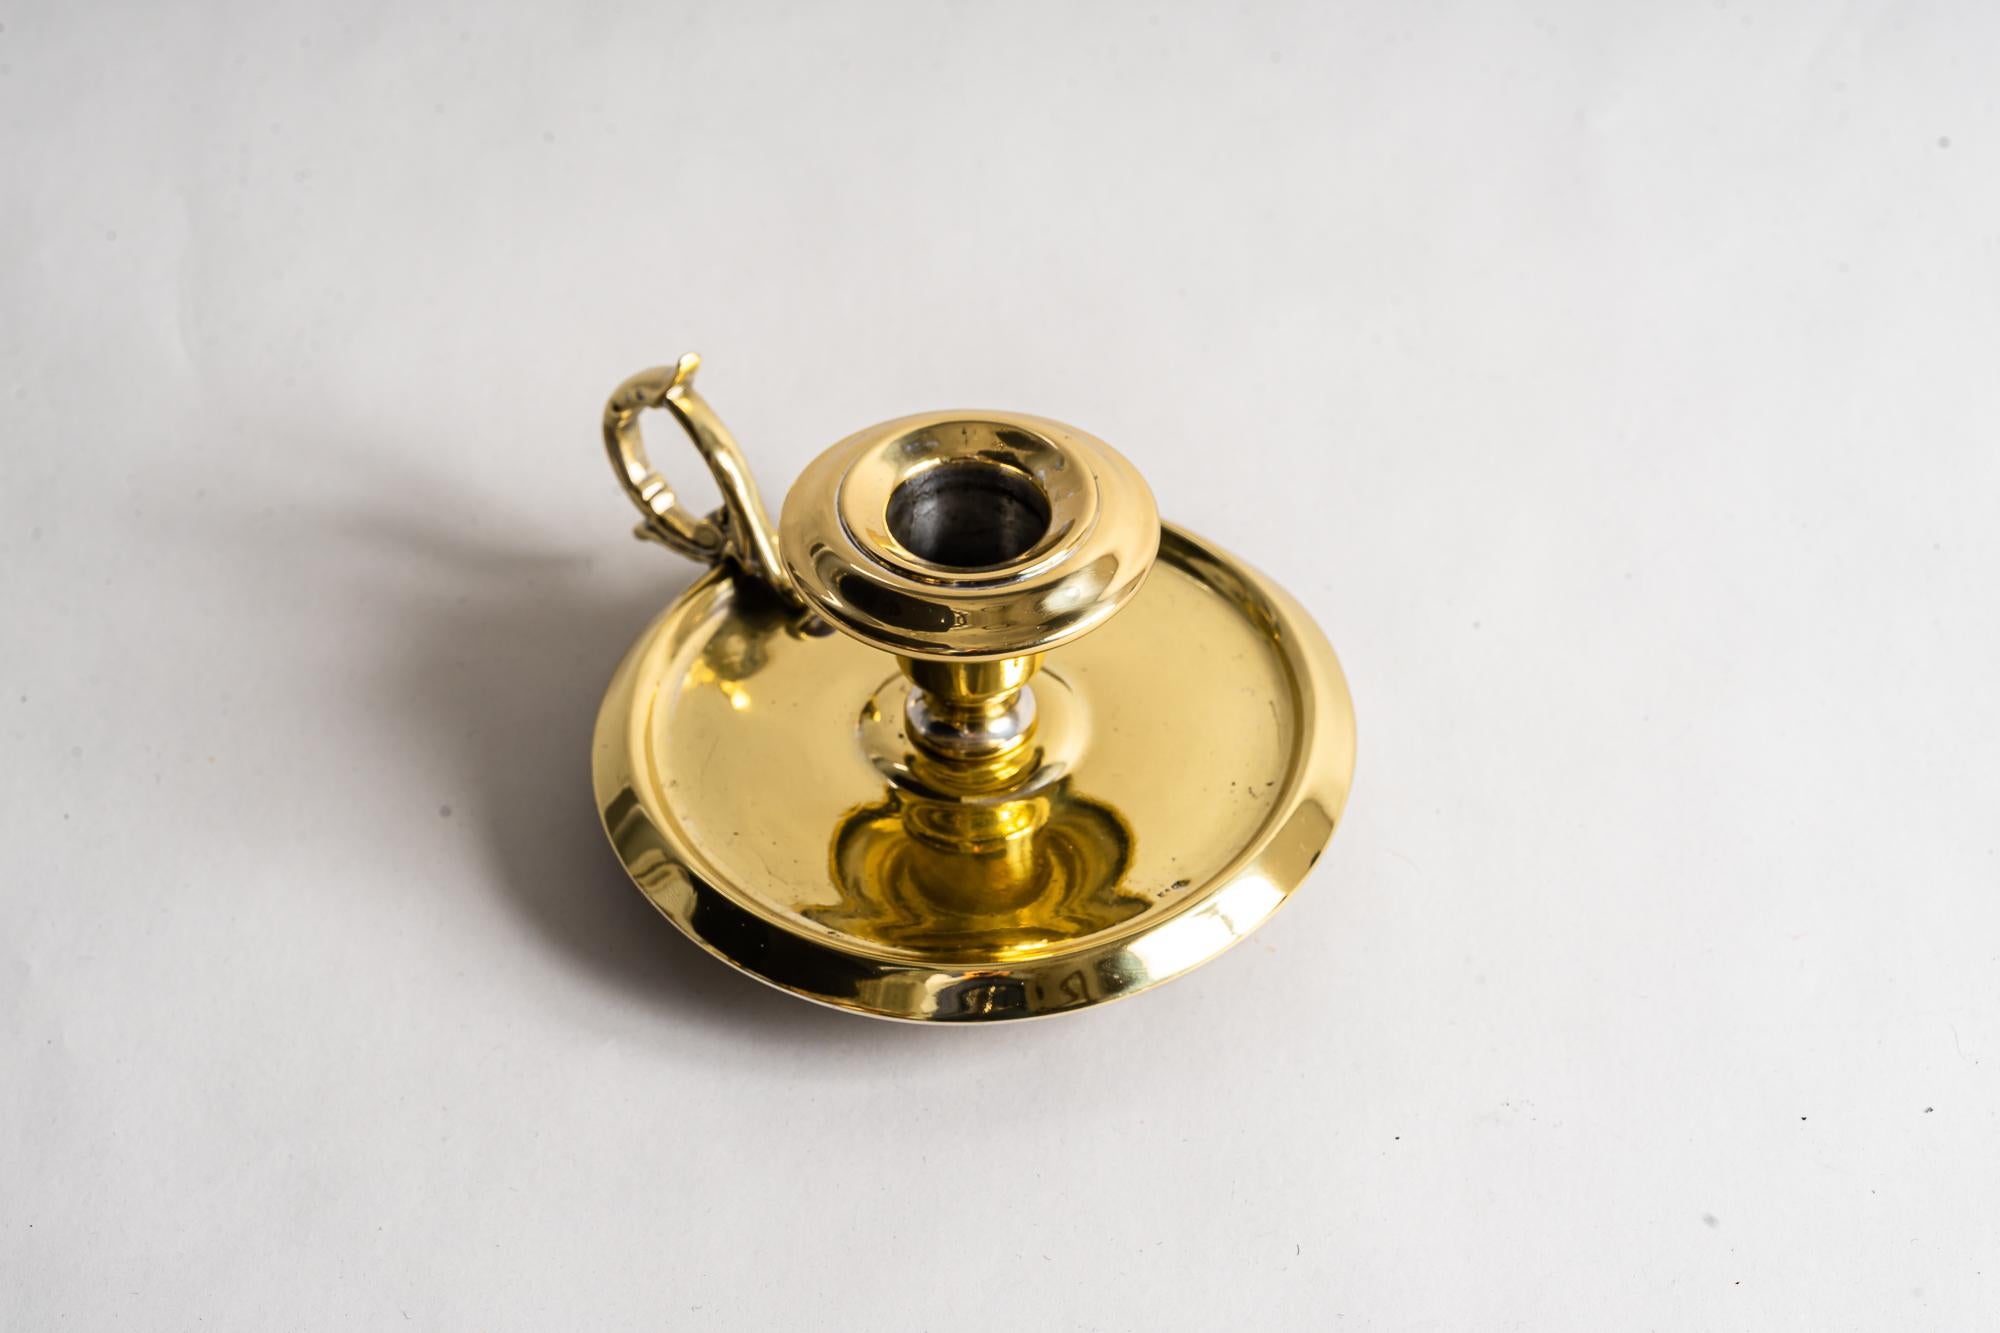 Historistic candle holder Vienna around 1890s
Brass polished and stove enamelled.